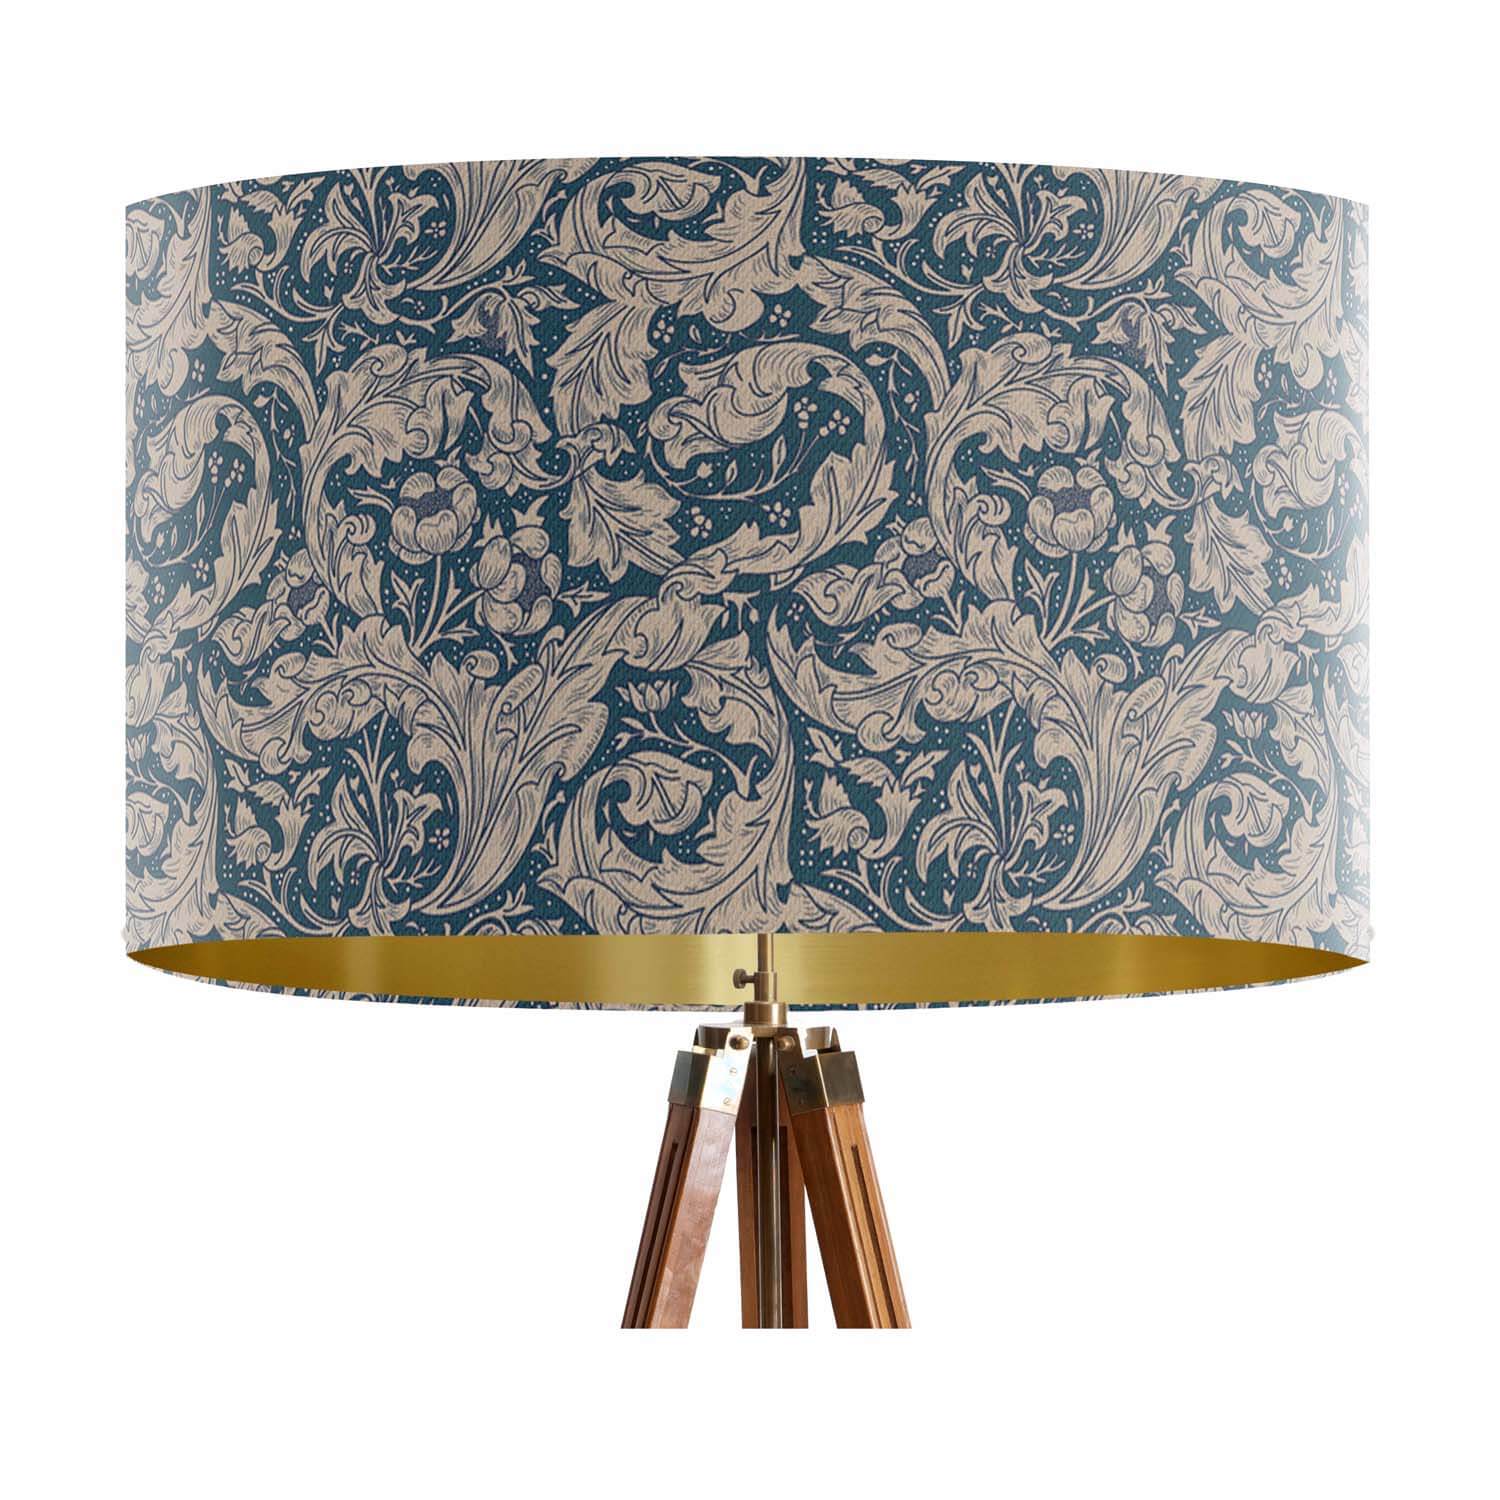 Bachelor's Buttons Provincial Blue - William Morris Gallery Lampshade